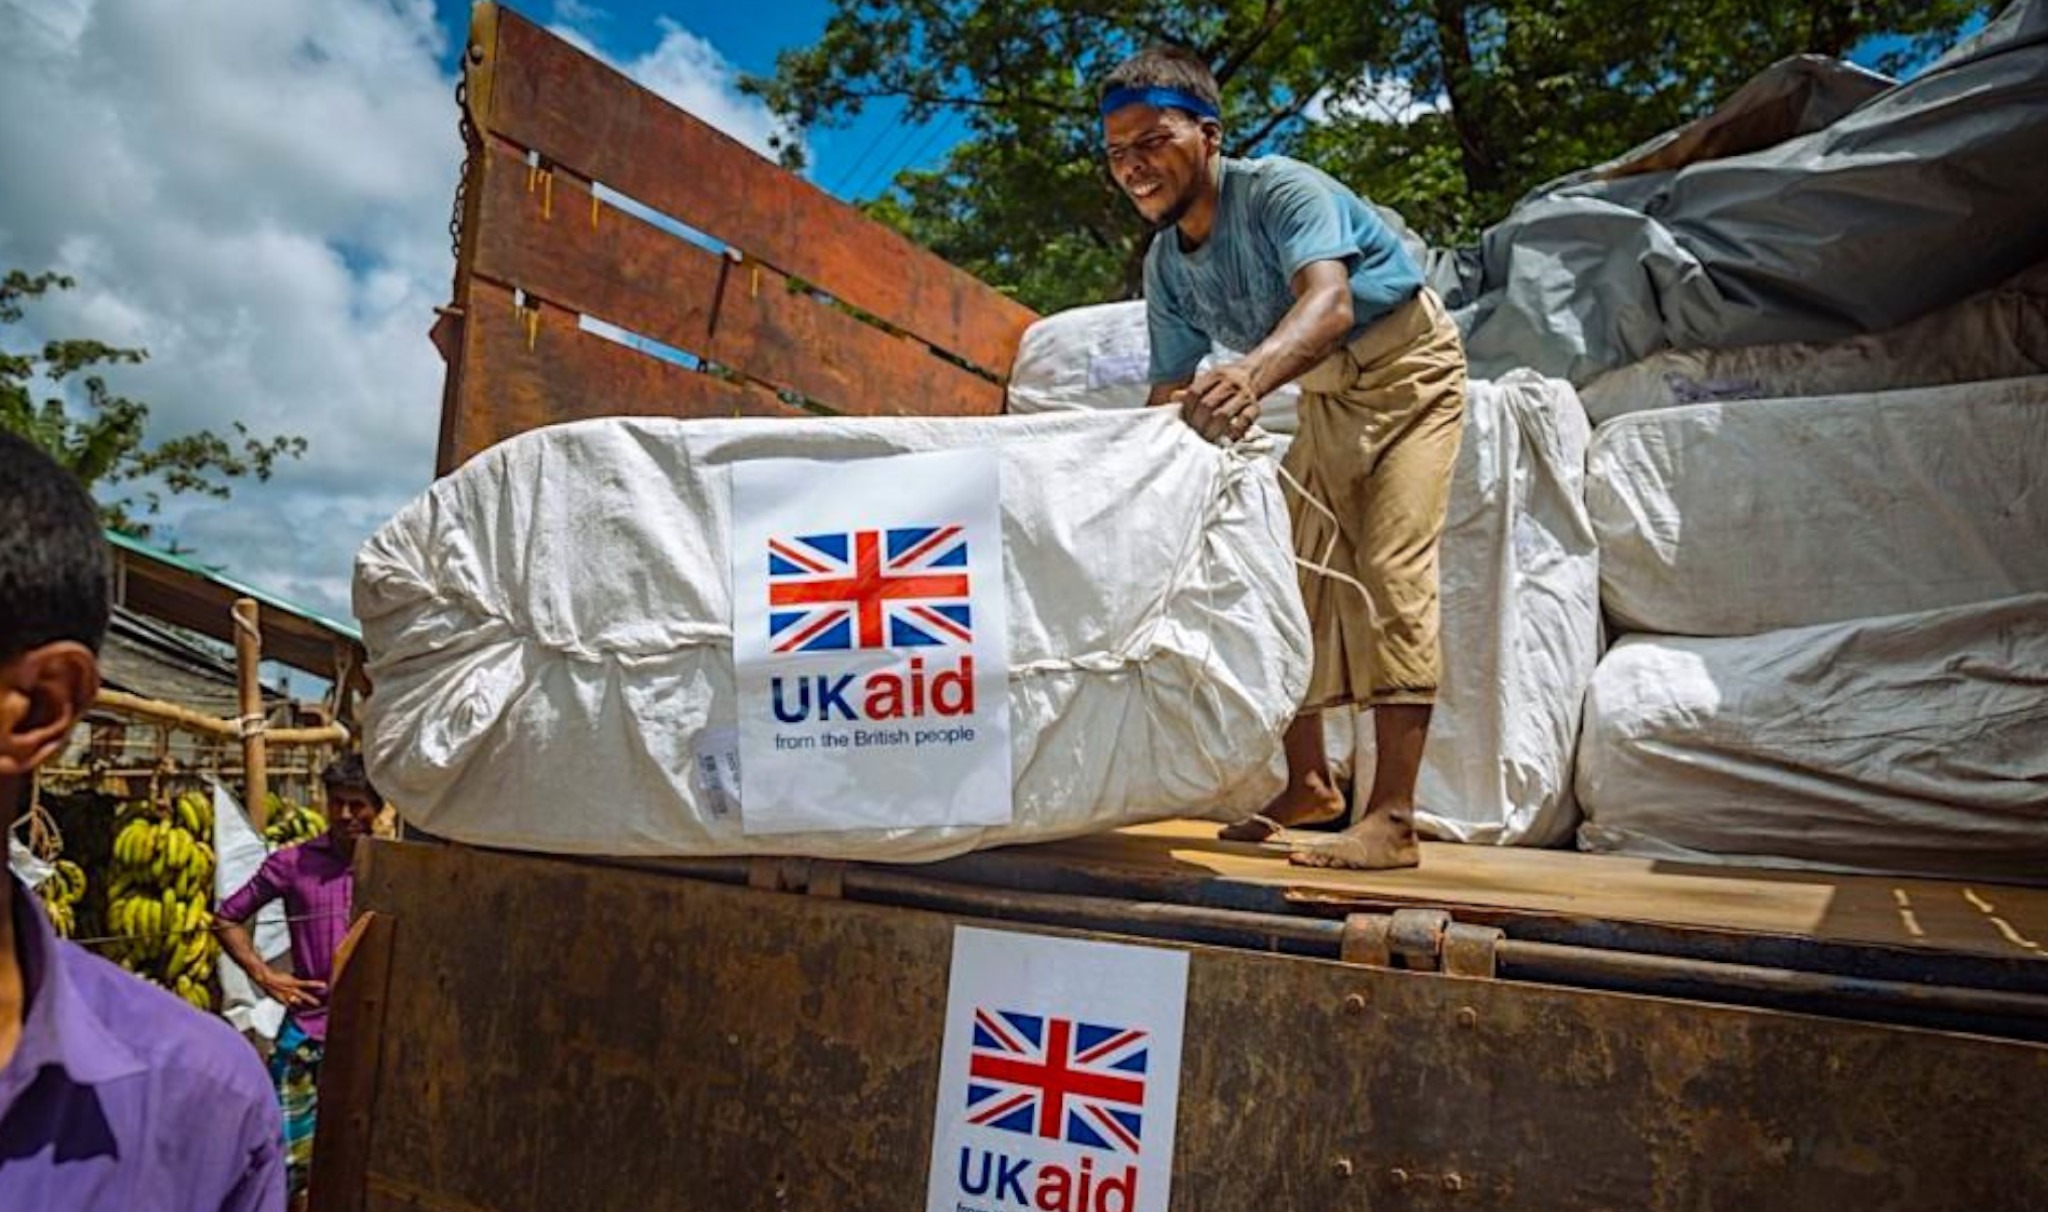 How Britain built a second empire under the cover of ‘aid’